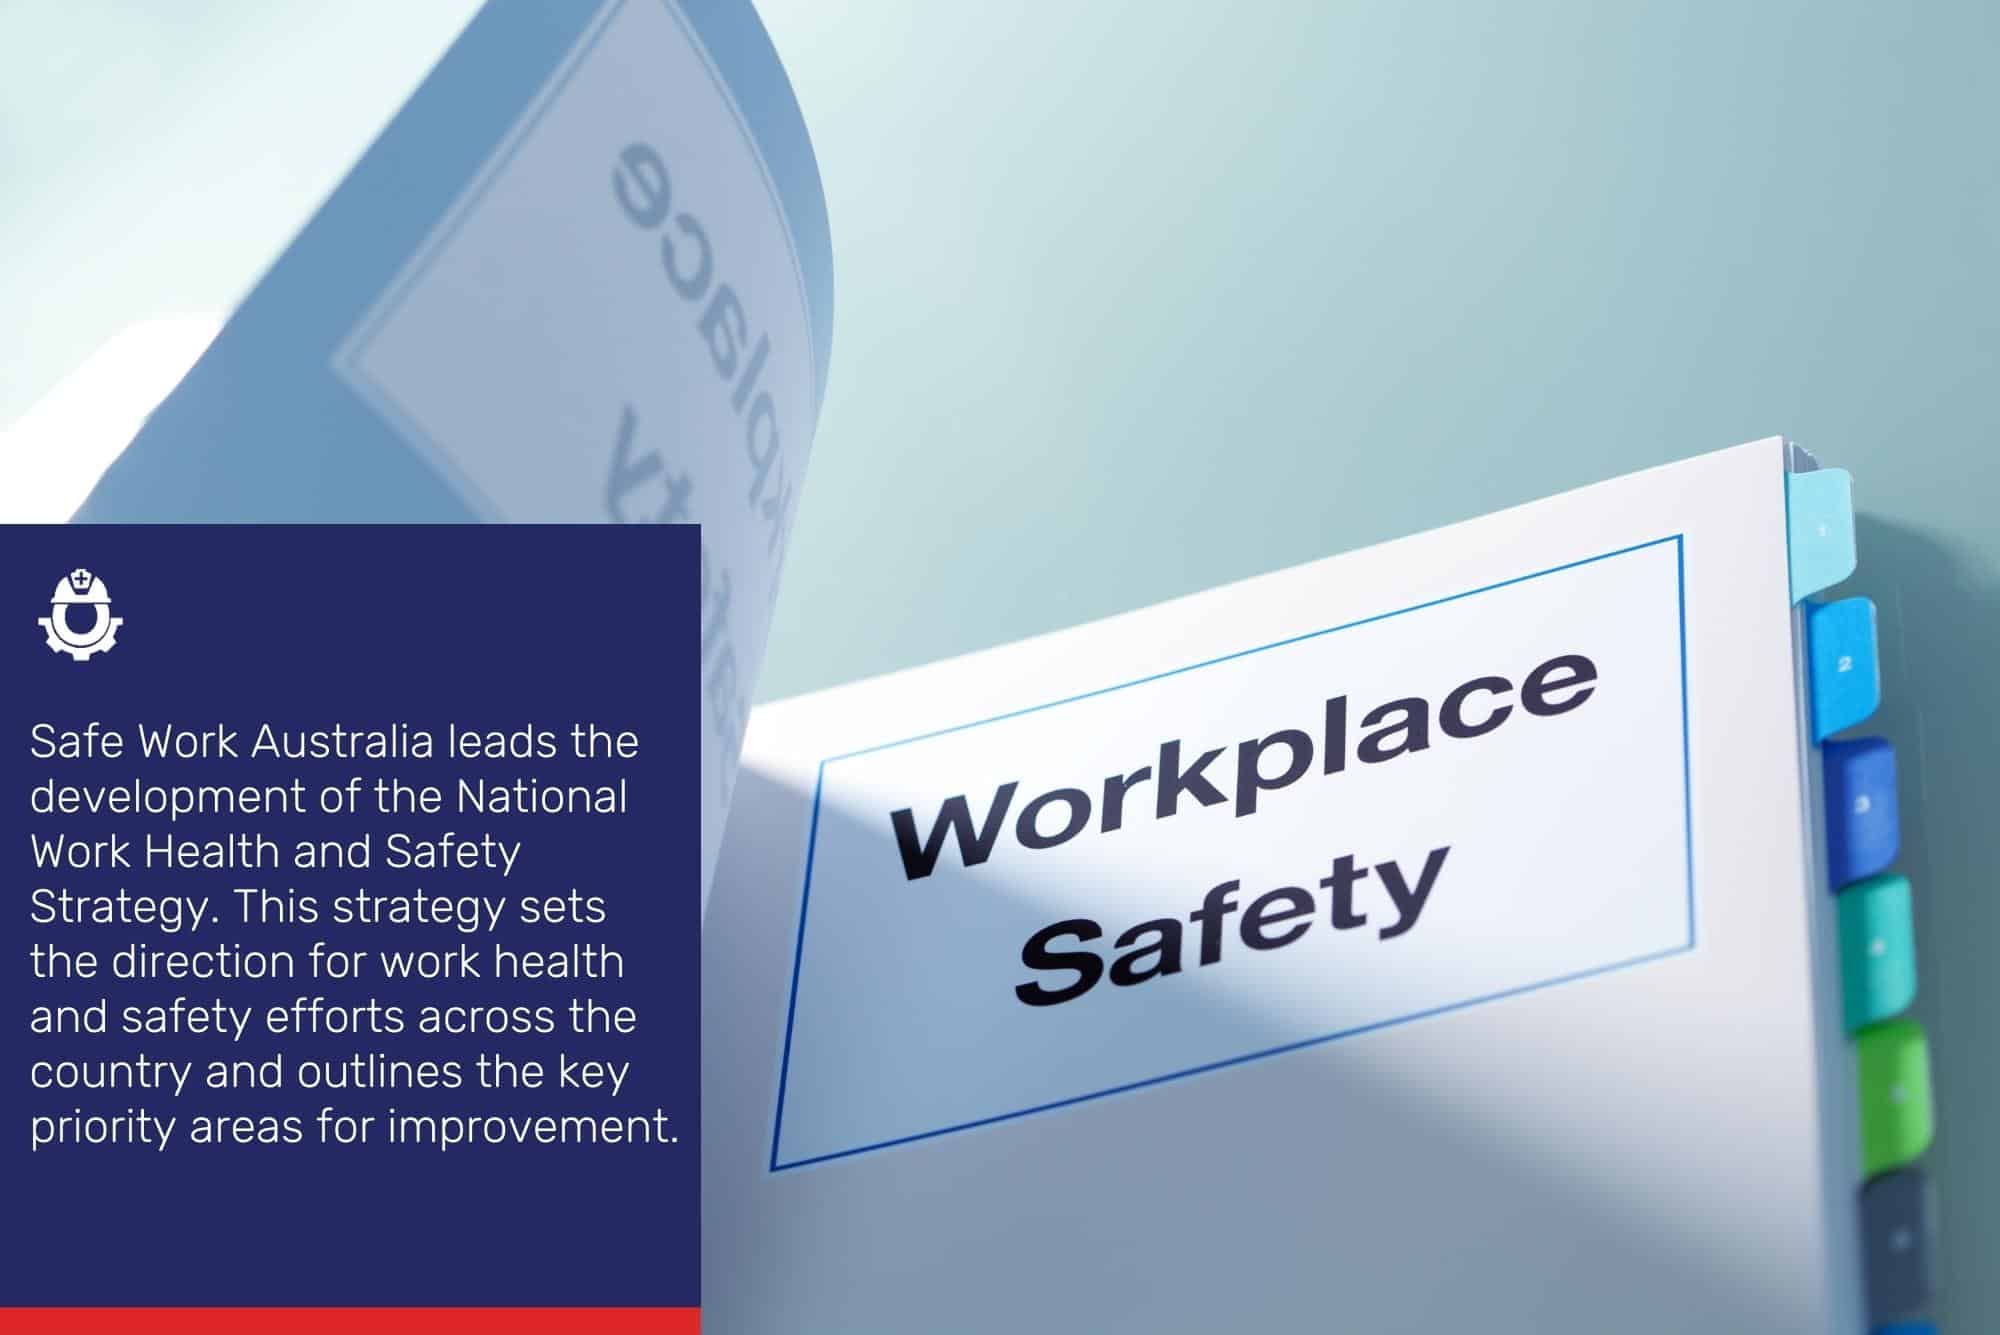 National Work Health and Safety Strategy